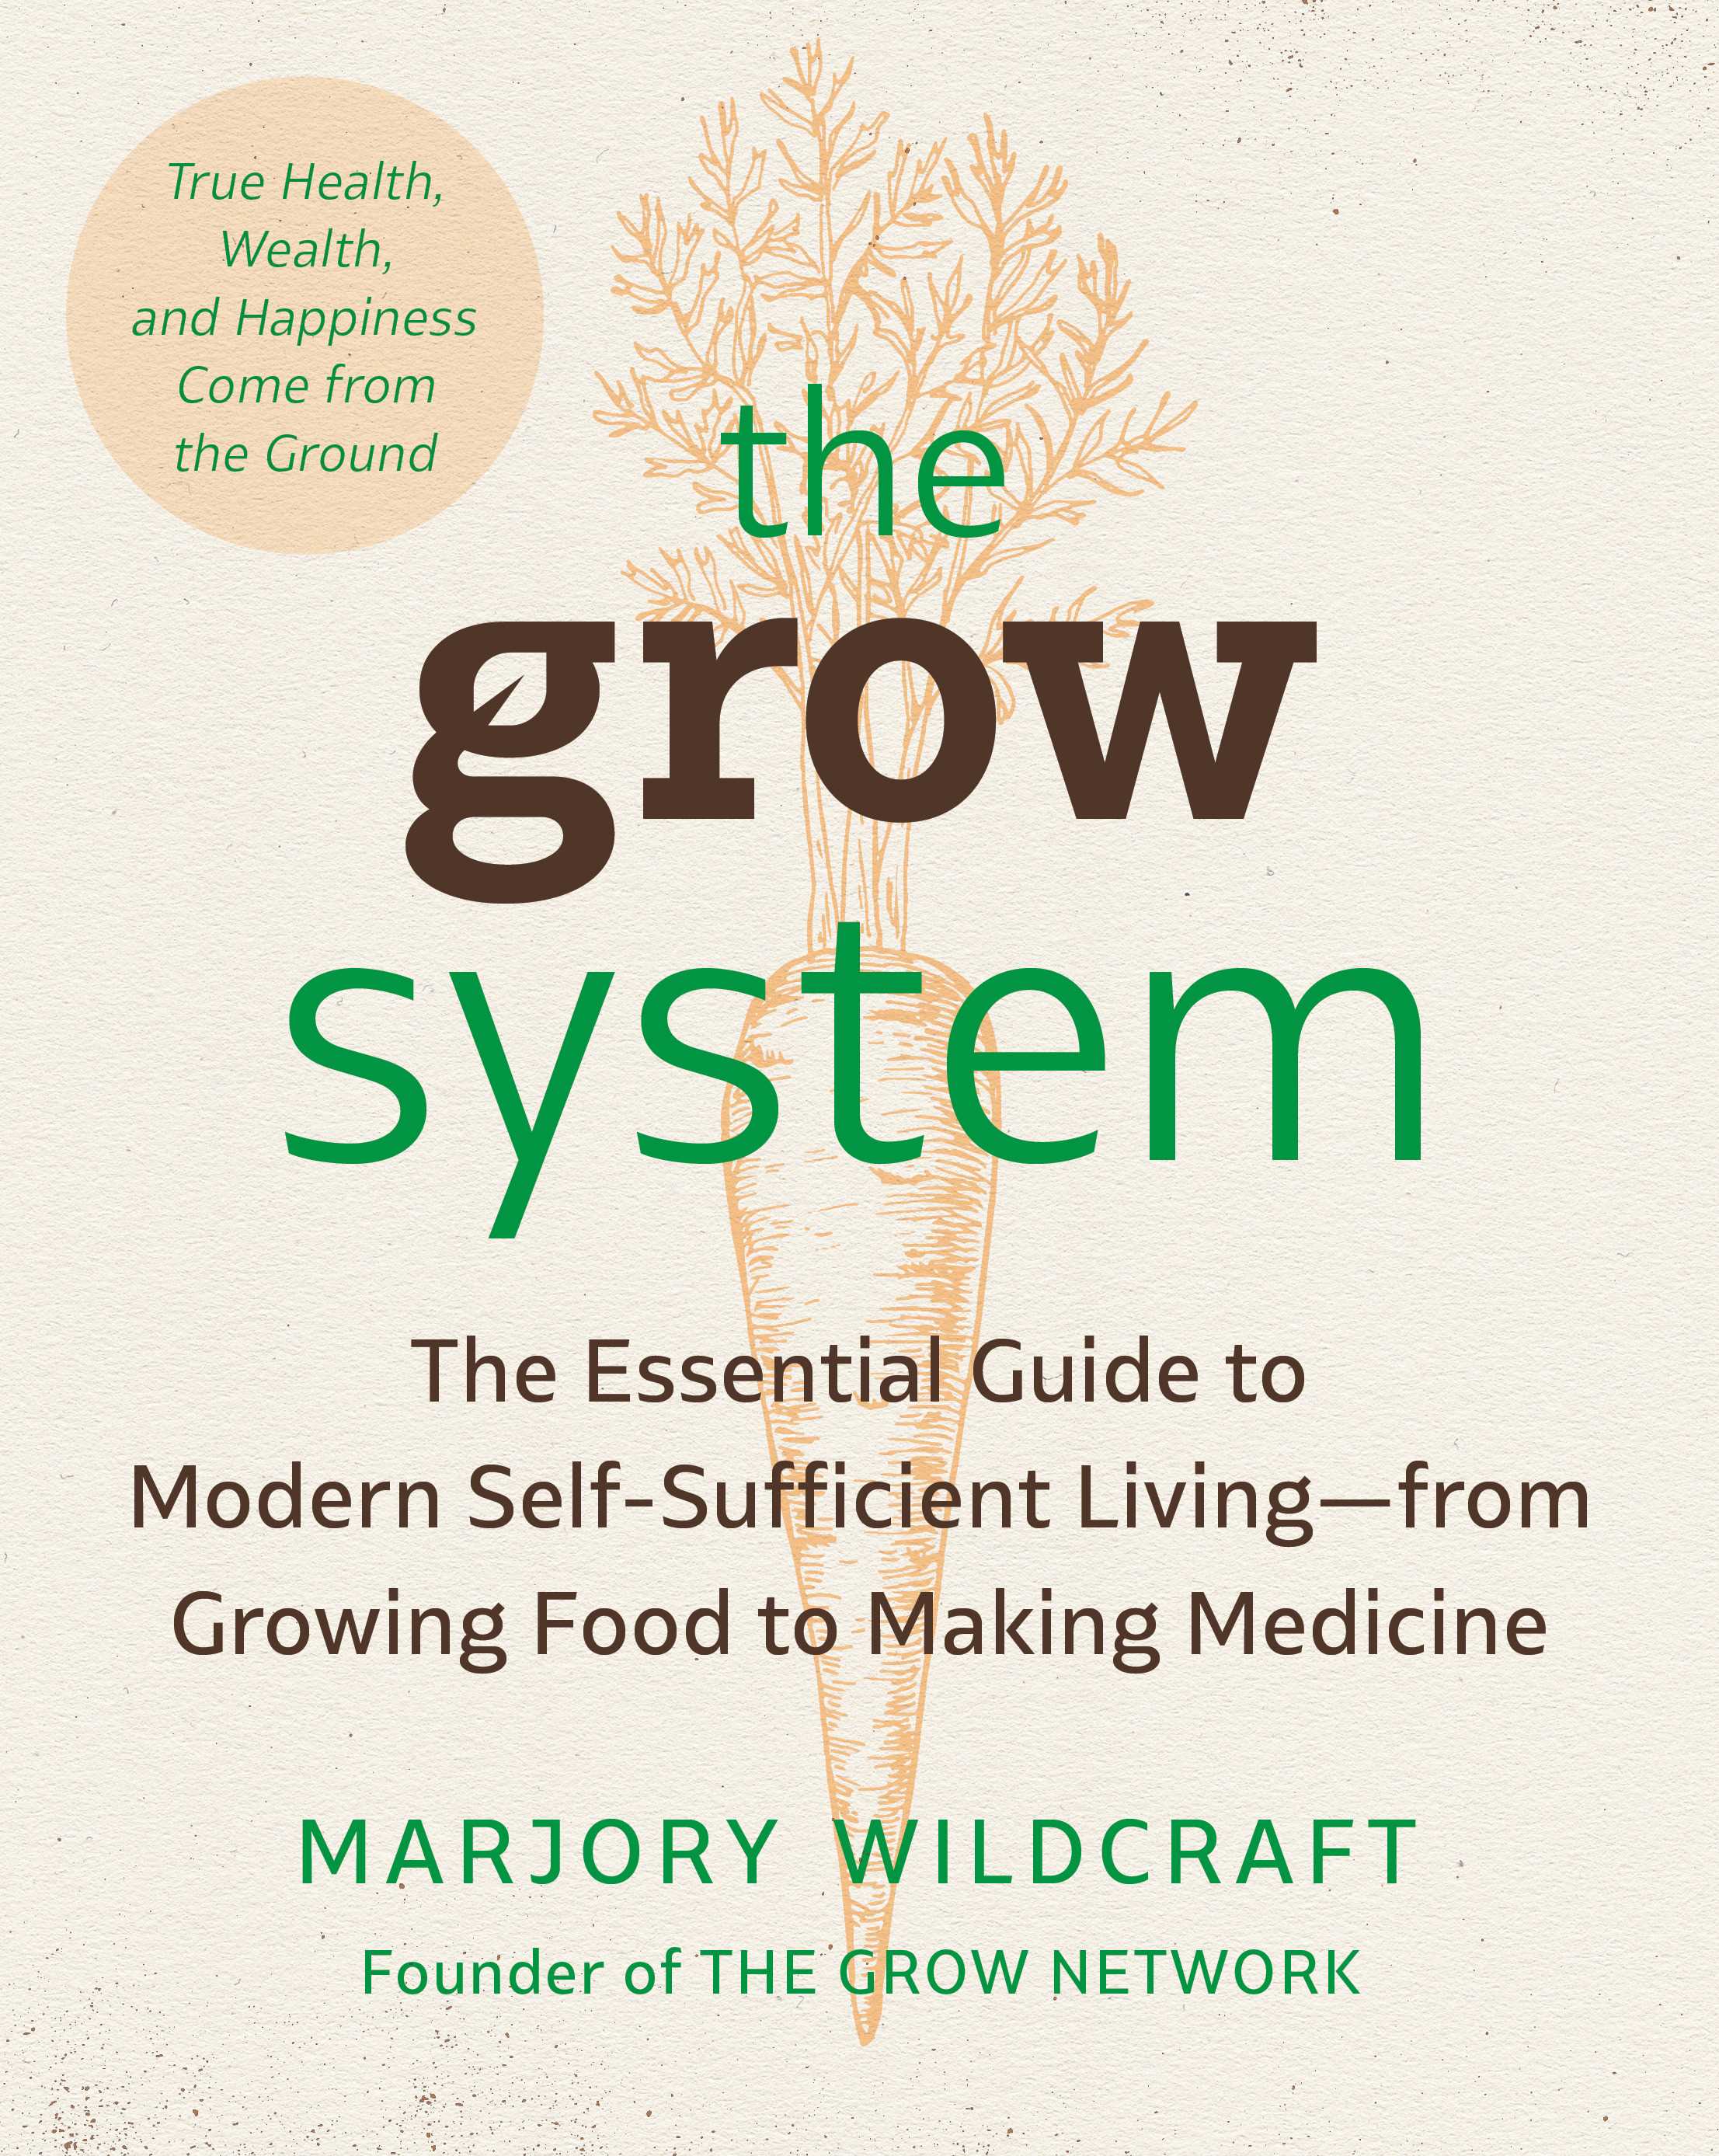 The Grow System